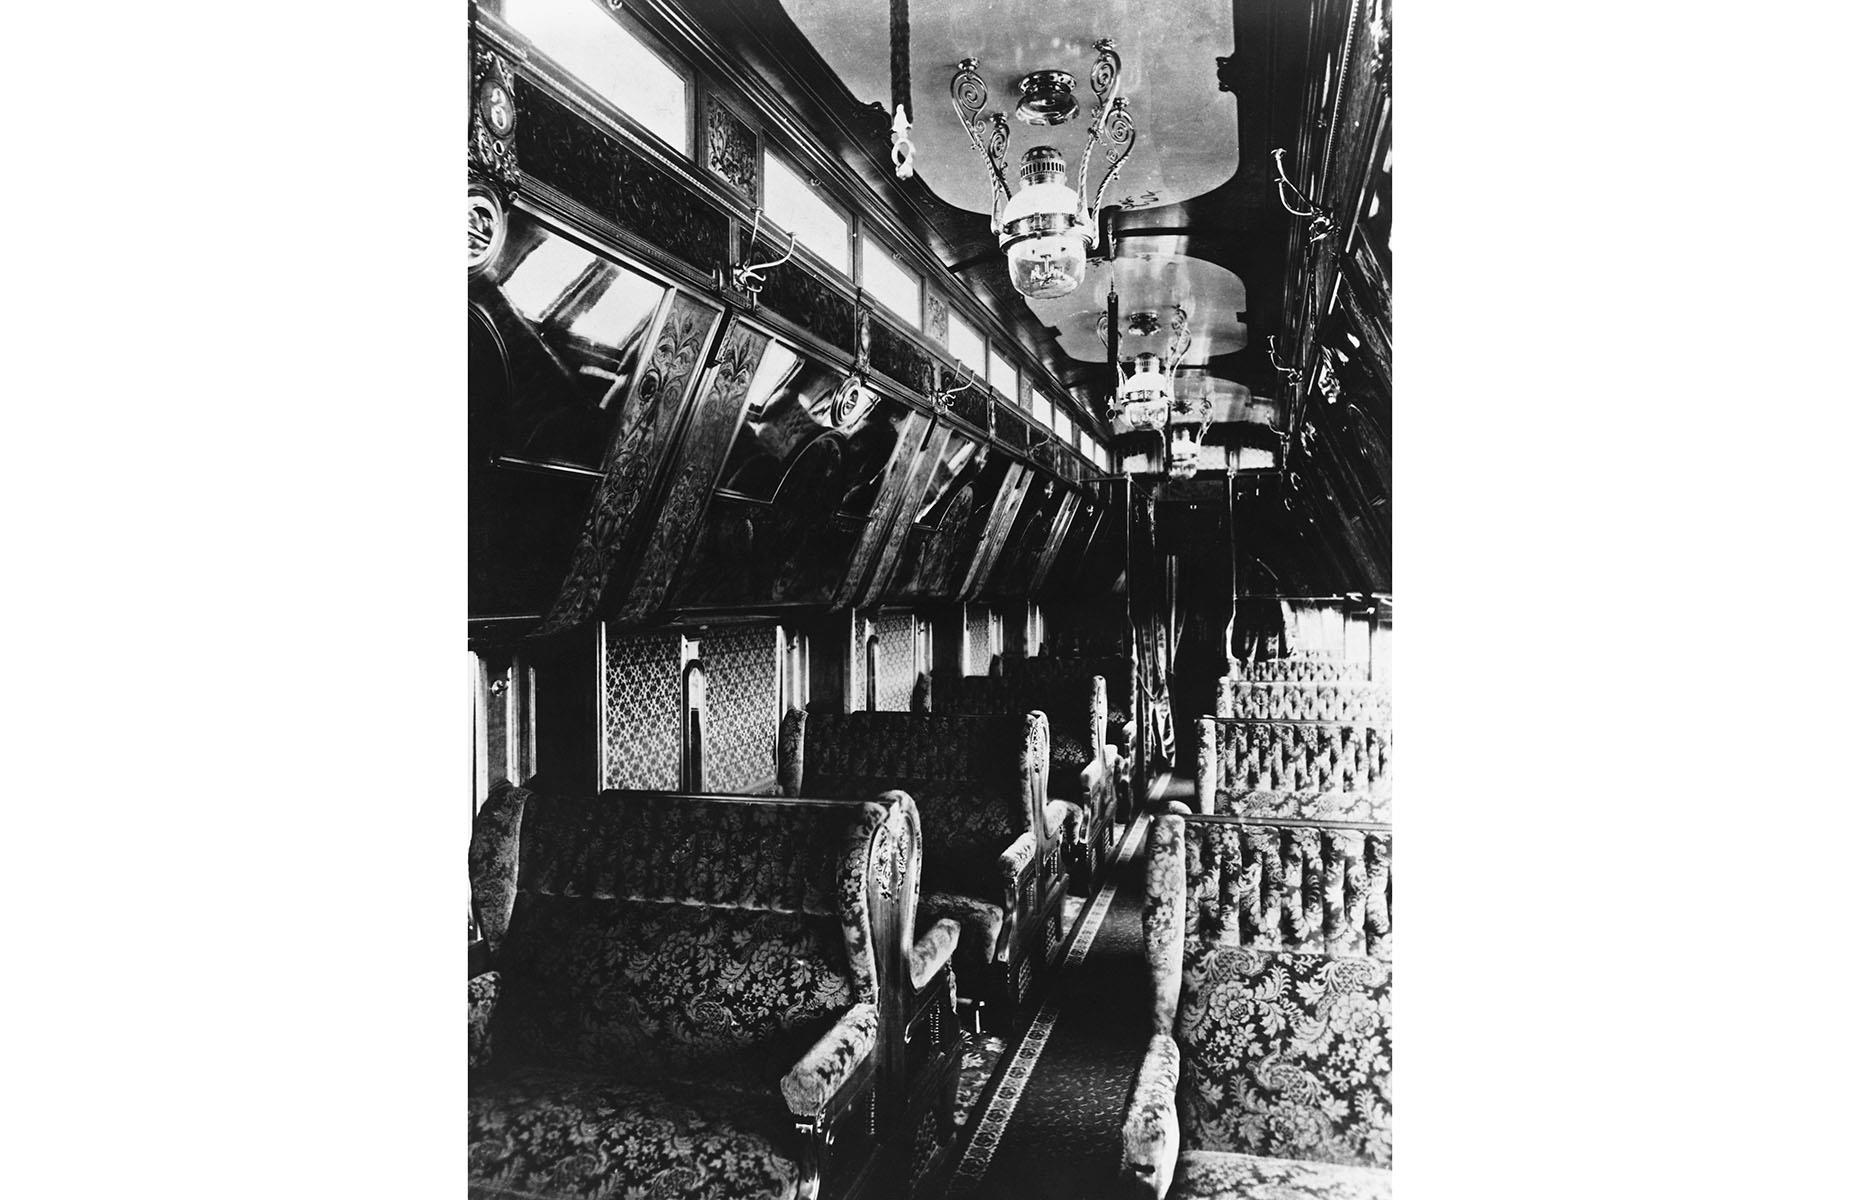 Before the turn of the 20th century, rail travel was expensive, especially in America, but Chicago-based Pullman Company, led by George Pullman found a way to make it even more luxurious. Founded in 1867, the company produced a range of ornate dining, sleeping and parlour cars and even private cars for the super wealthy. These cars would be attached to commercial passenger trains and were essentially mini mansions on wheels.